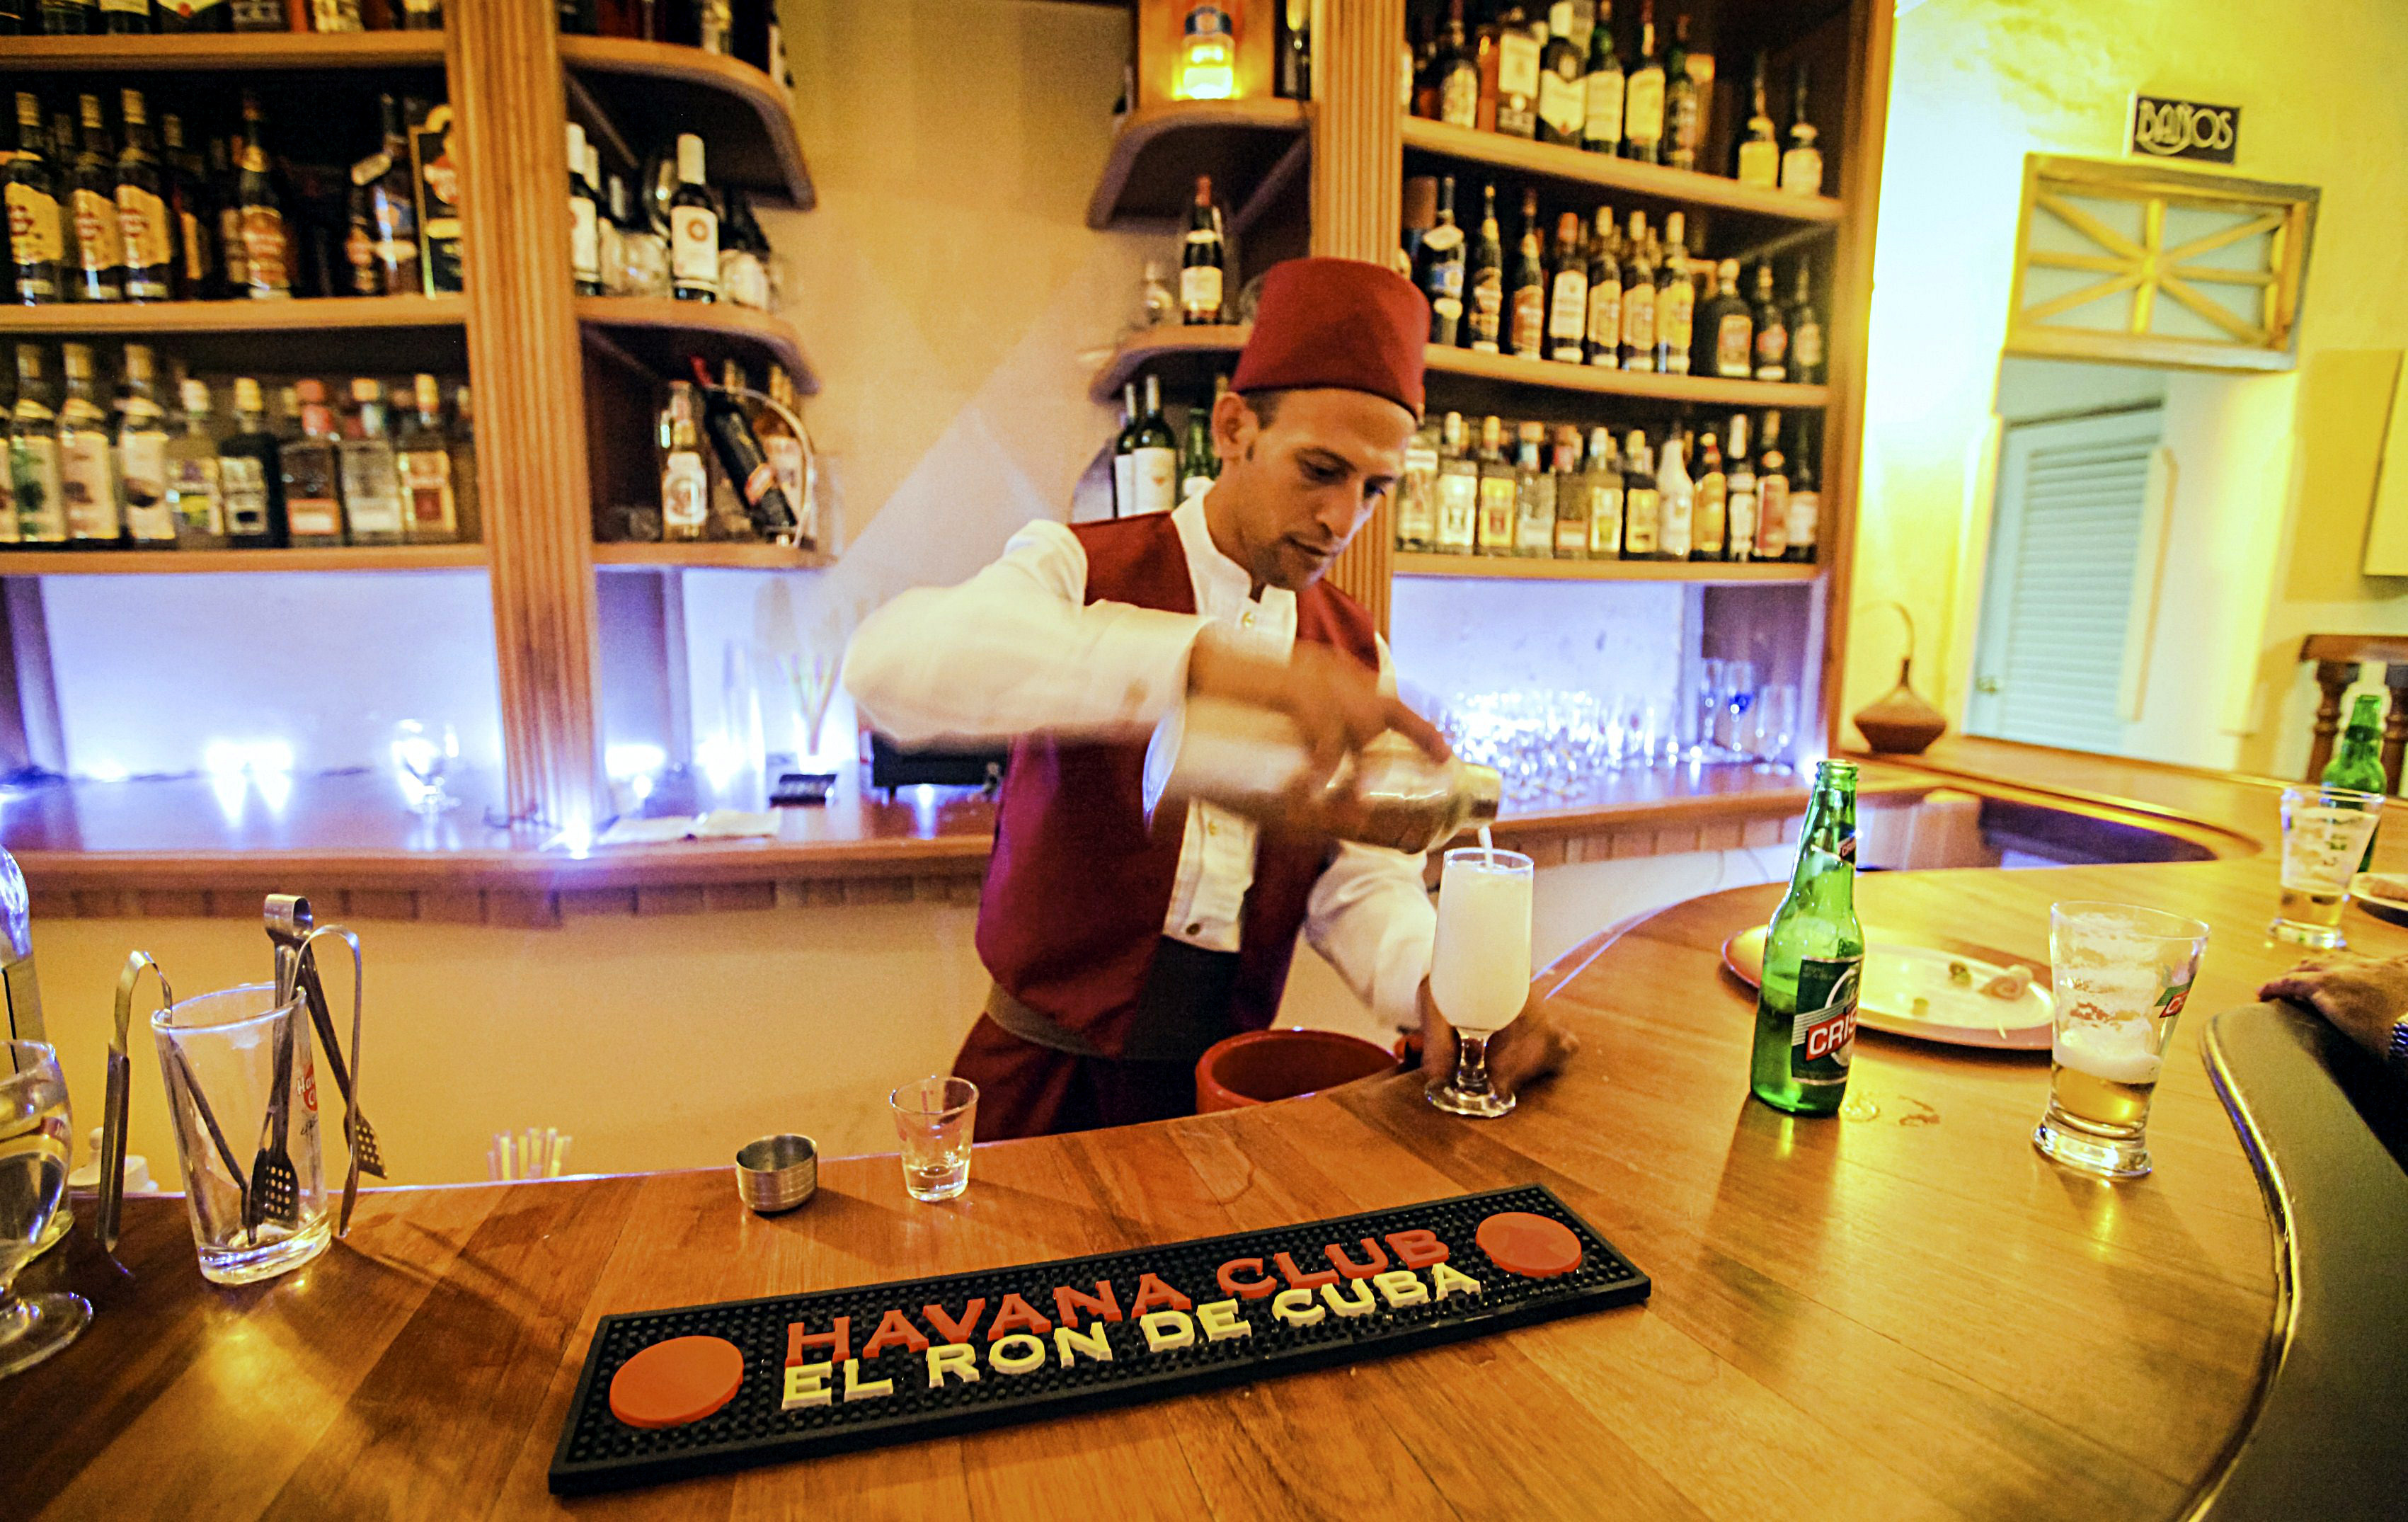 A bartender prepares a drink at the Casablanca bar in Camaguey. Image by Adalberto Roque / AFP / Getty